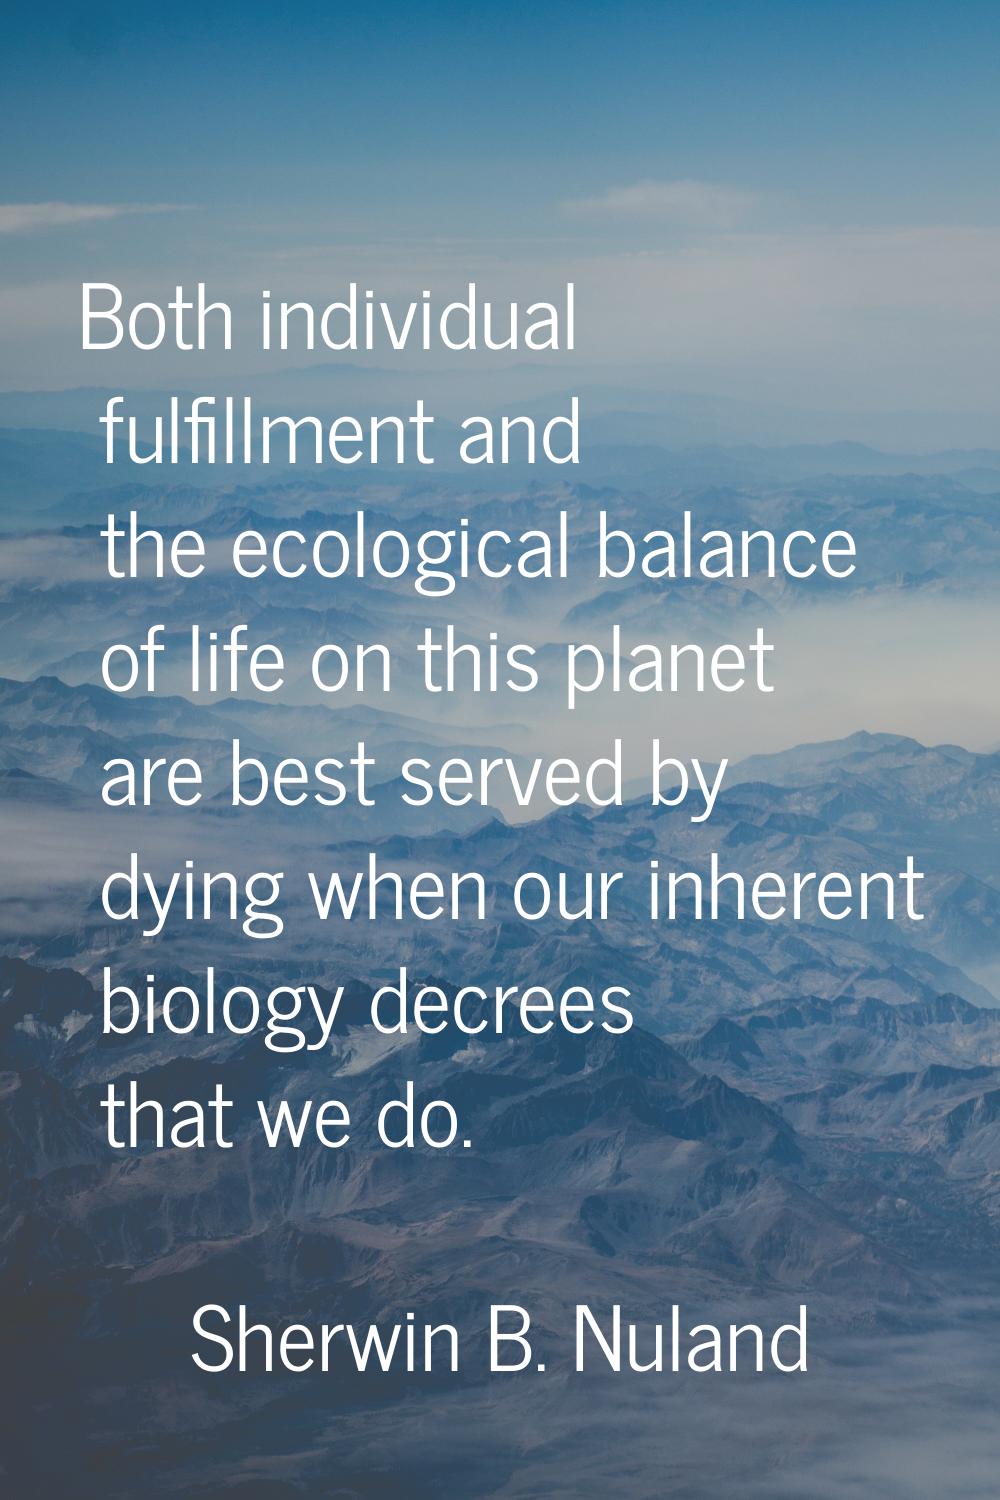 Both individual fulfillment and the ecological balance of life on this planet are best served by dy